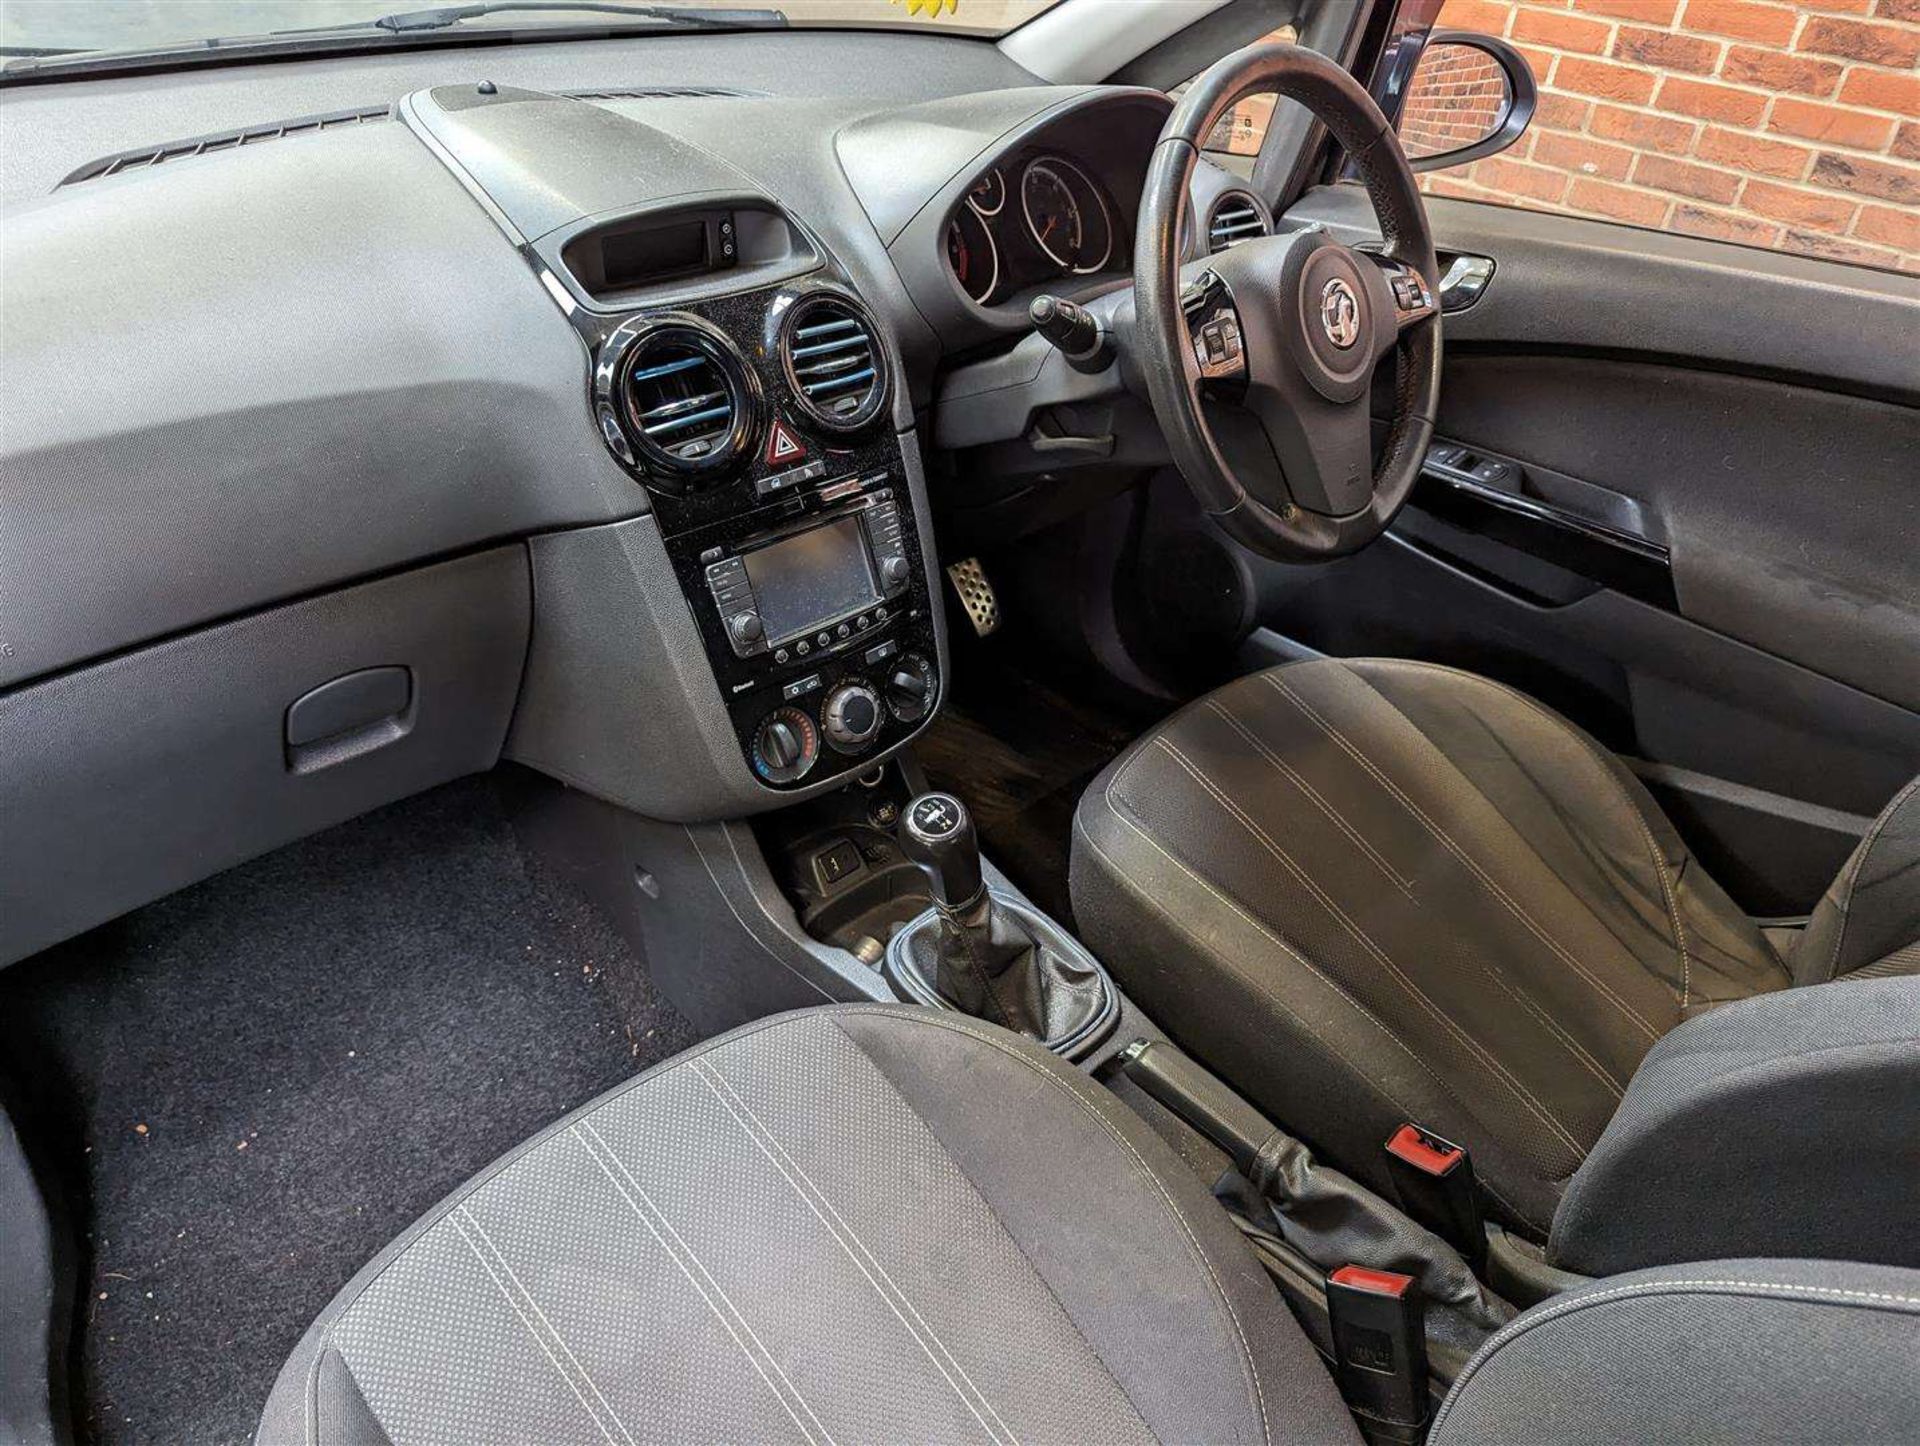 2012 VAUXHALL CORSA LIMITED EDITION - Image 11 of 28